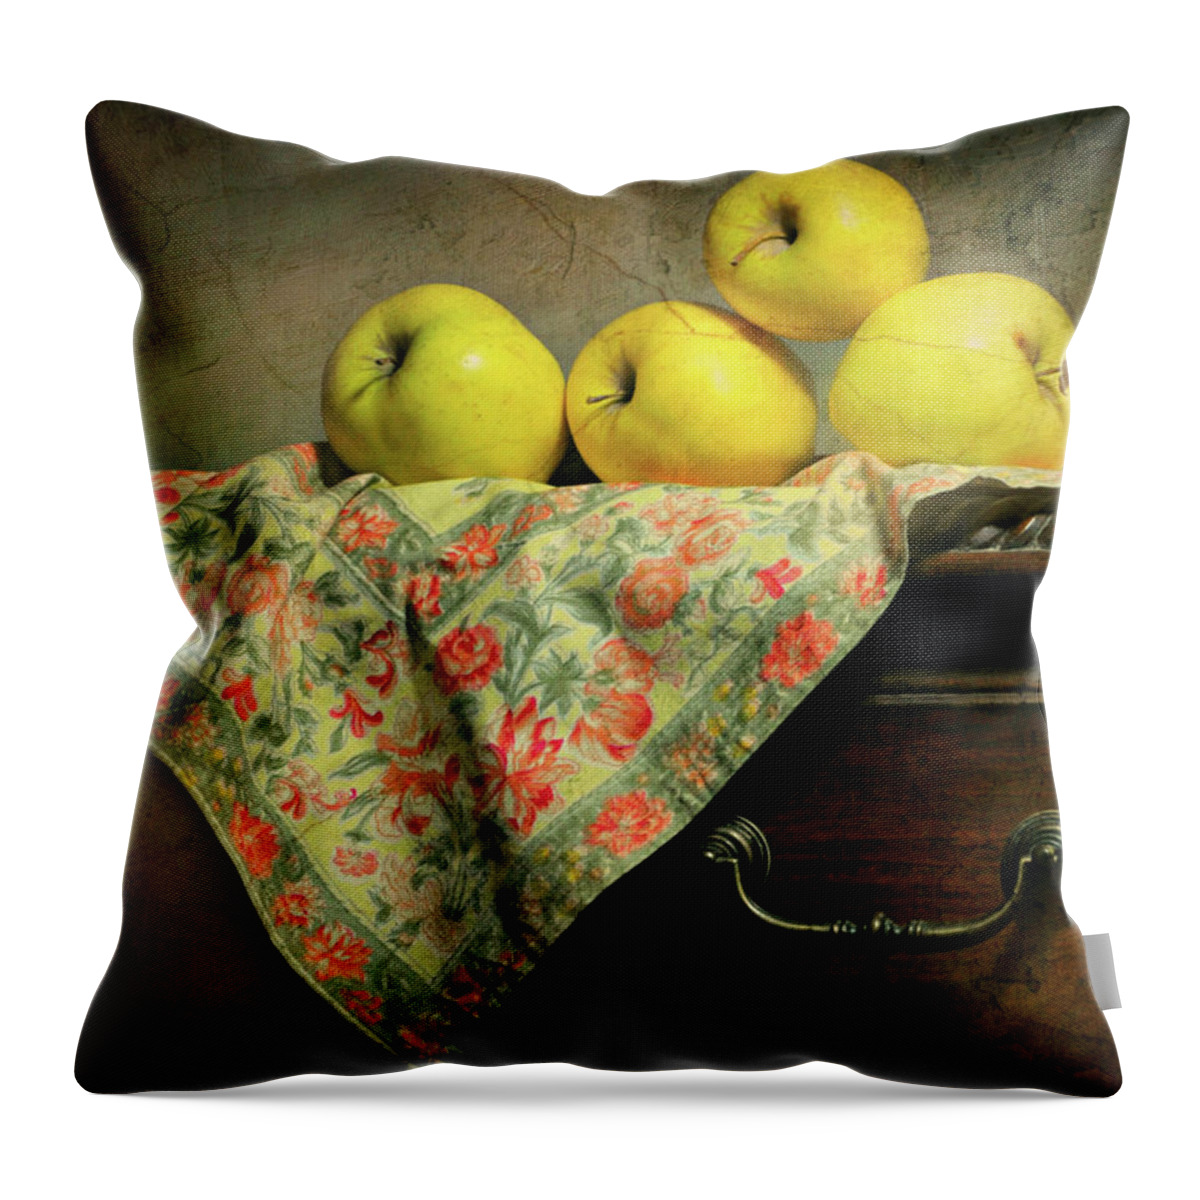 Still Life Throw Pillow featuring the photograph Apple Cloth by Diana Angstadt